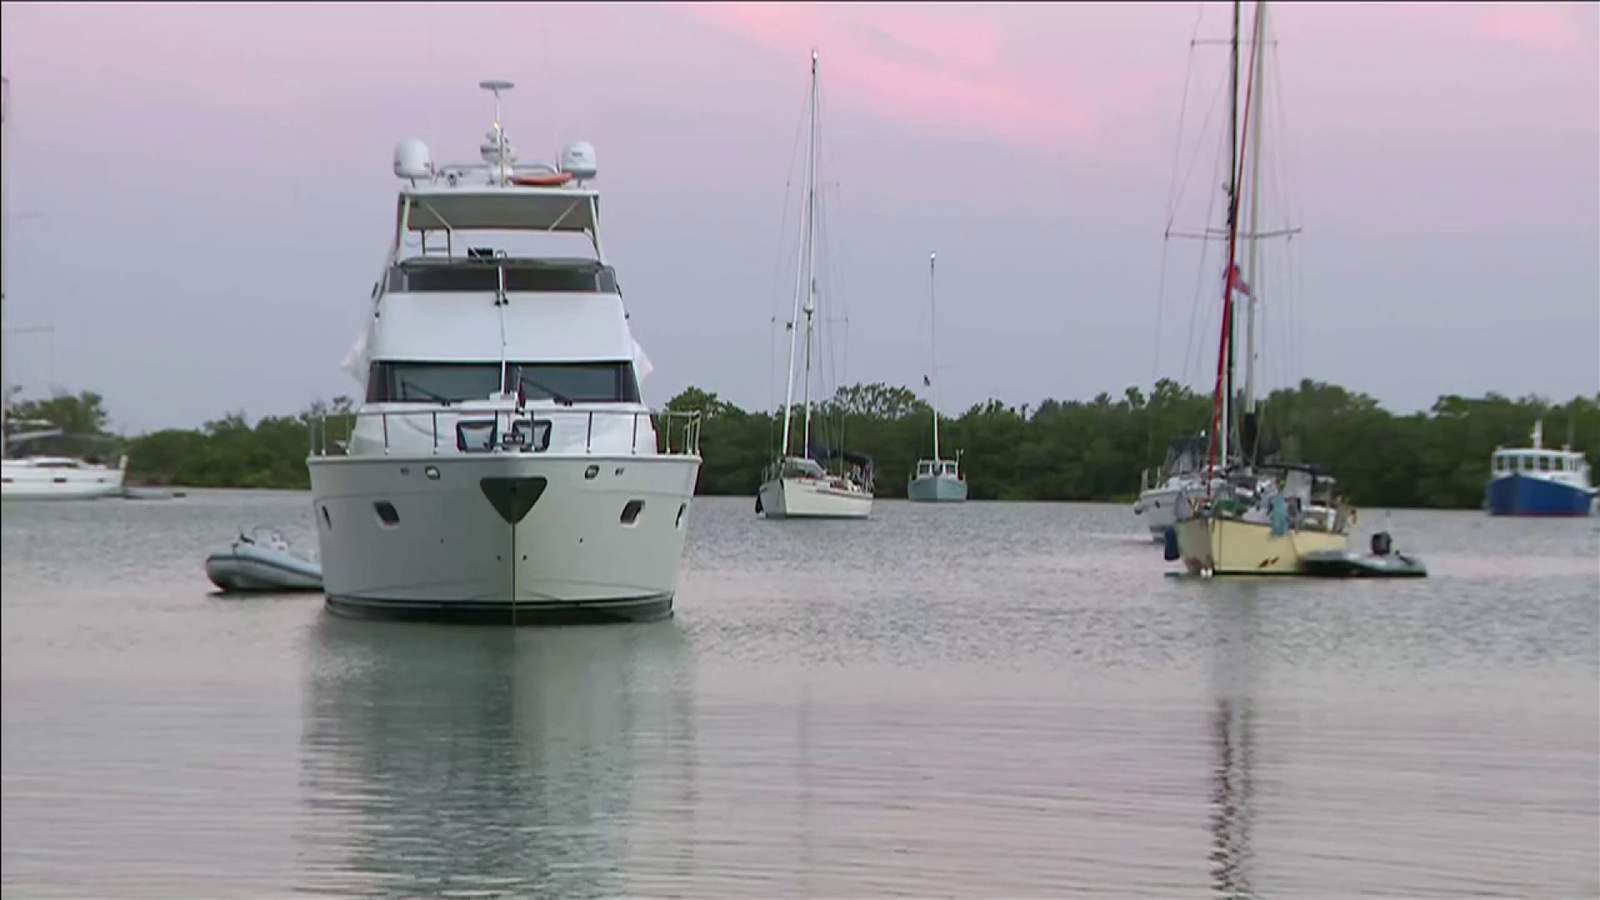 2 people from capsized boat rescued out of Biscayne Bay